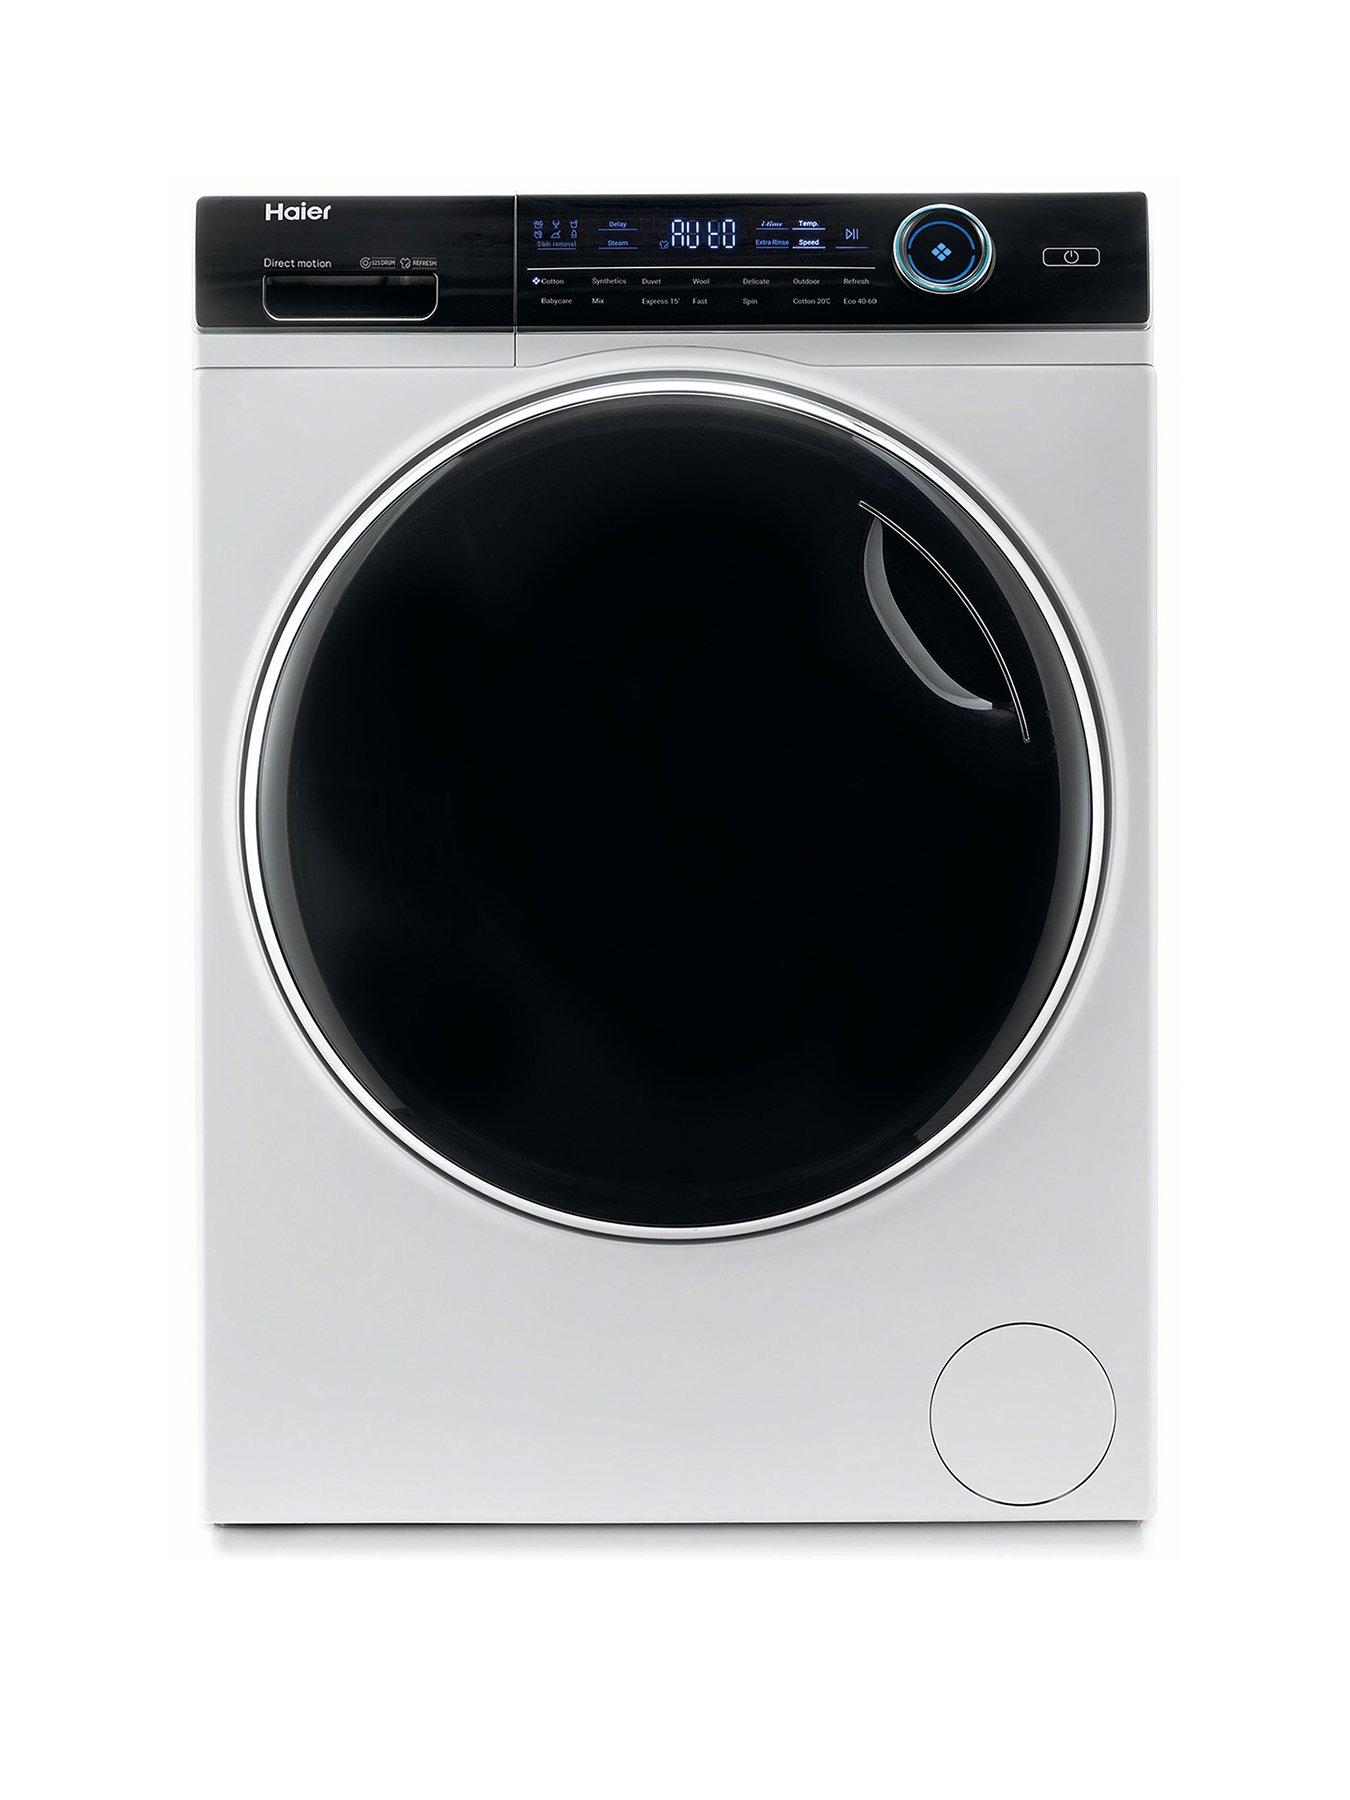 Haier I-Pro Series 7 Hw100-B14979 10Kg Wash, 1400 Spin Washing Machine, A Rated - White